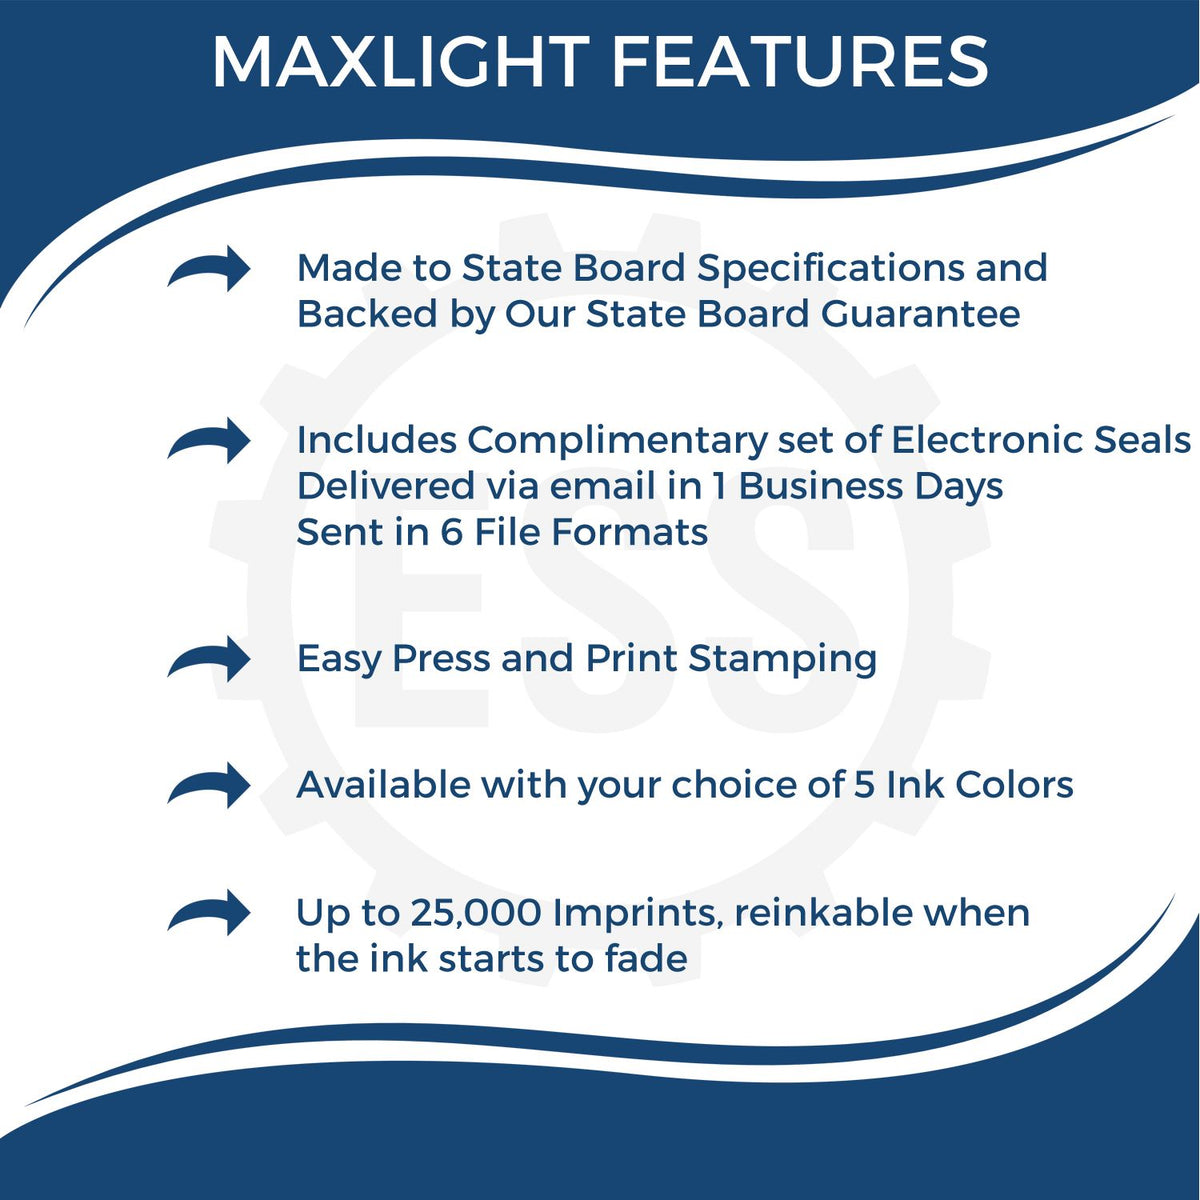 A picture of an infographic highlighting the selling points for the Premium MaxLight Pre-Inked Washington Geology Stamp